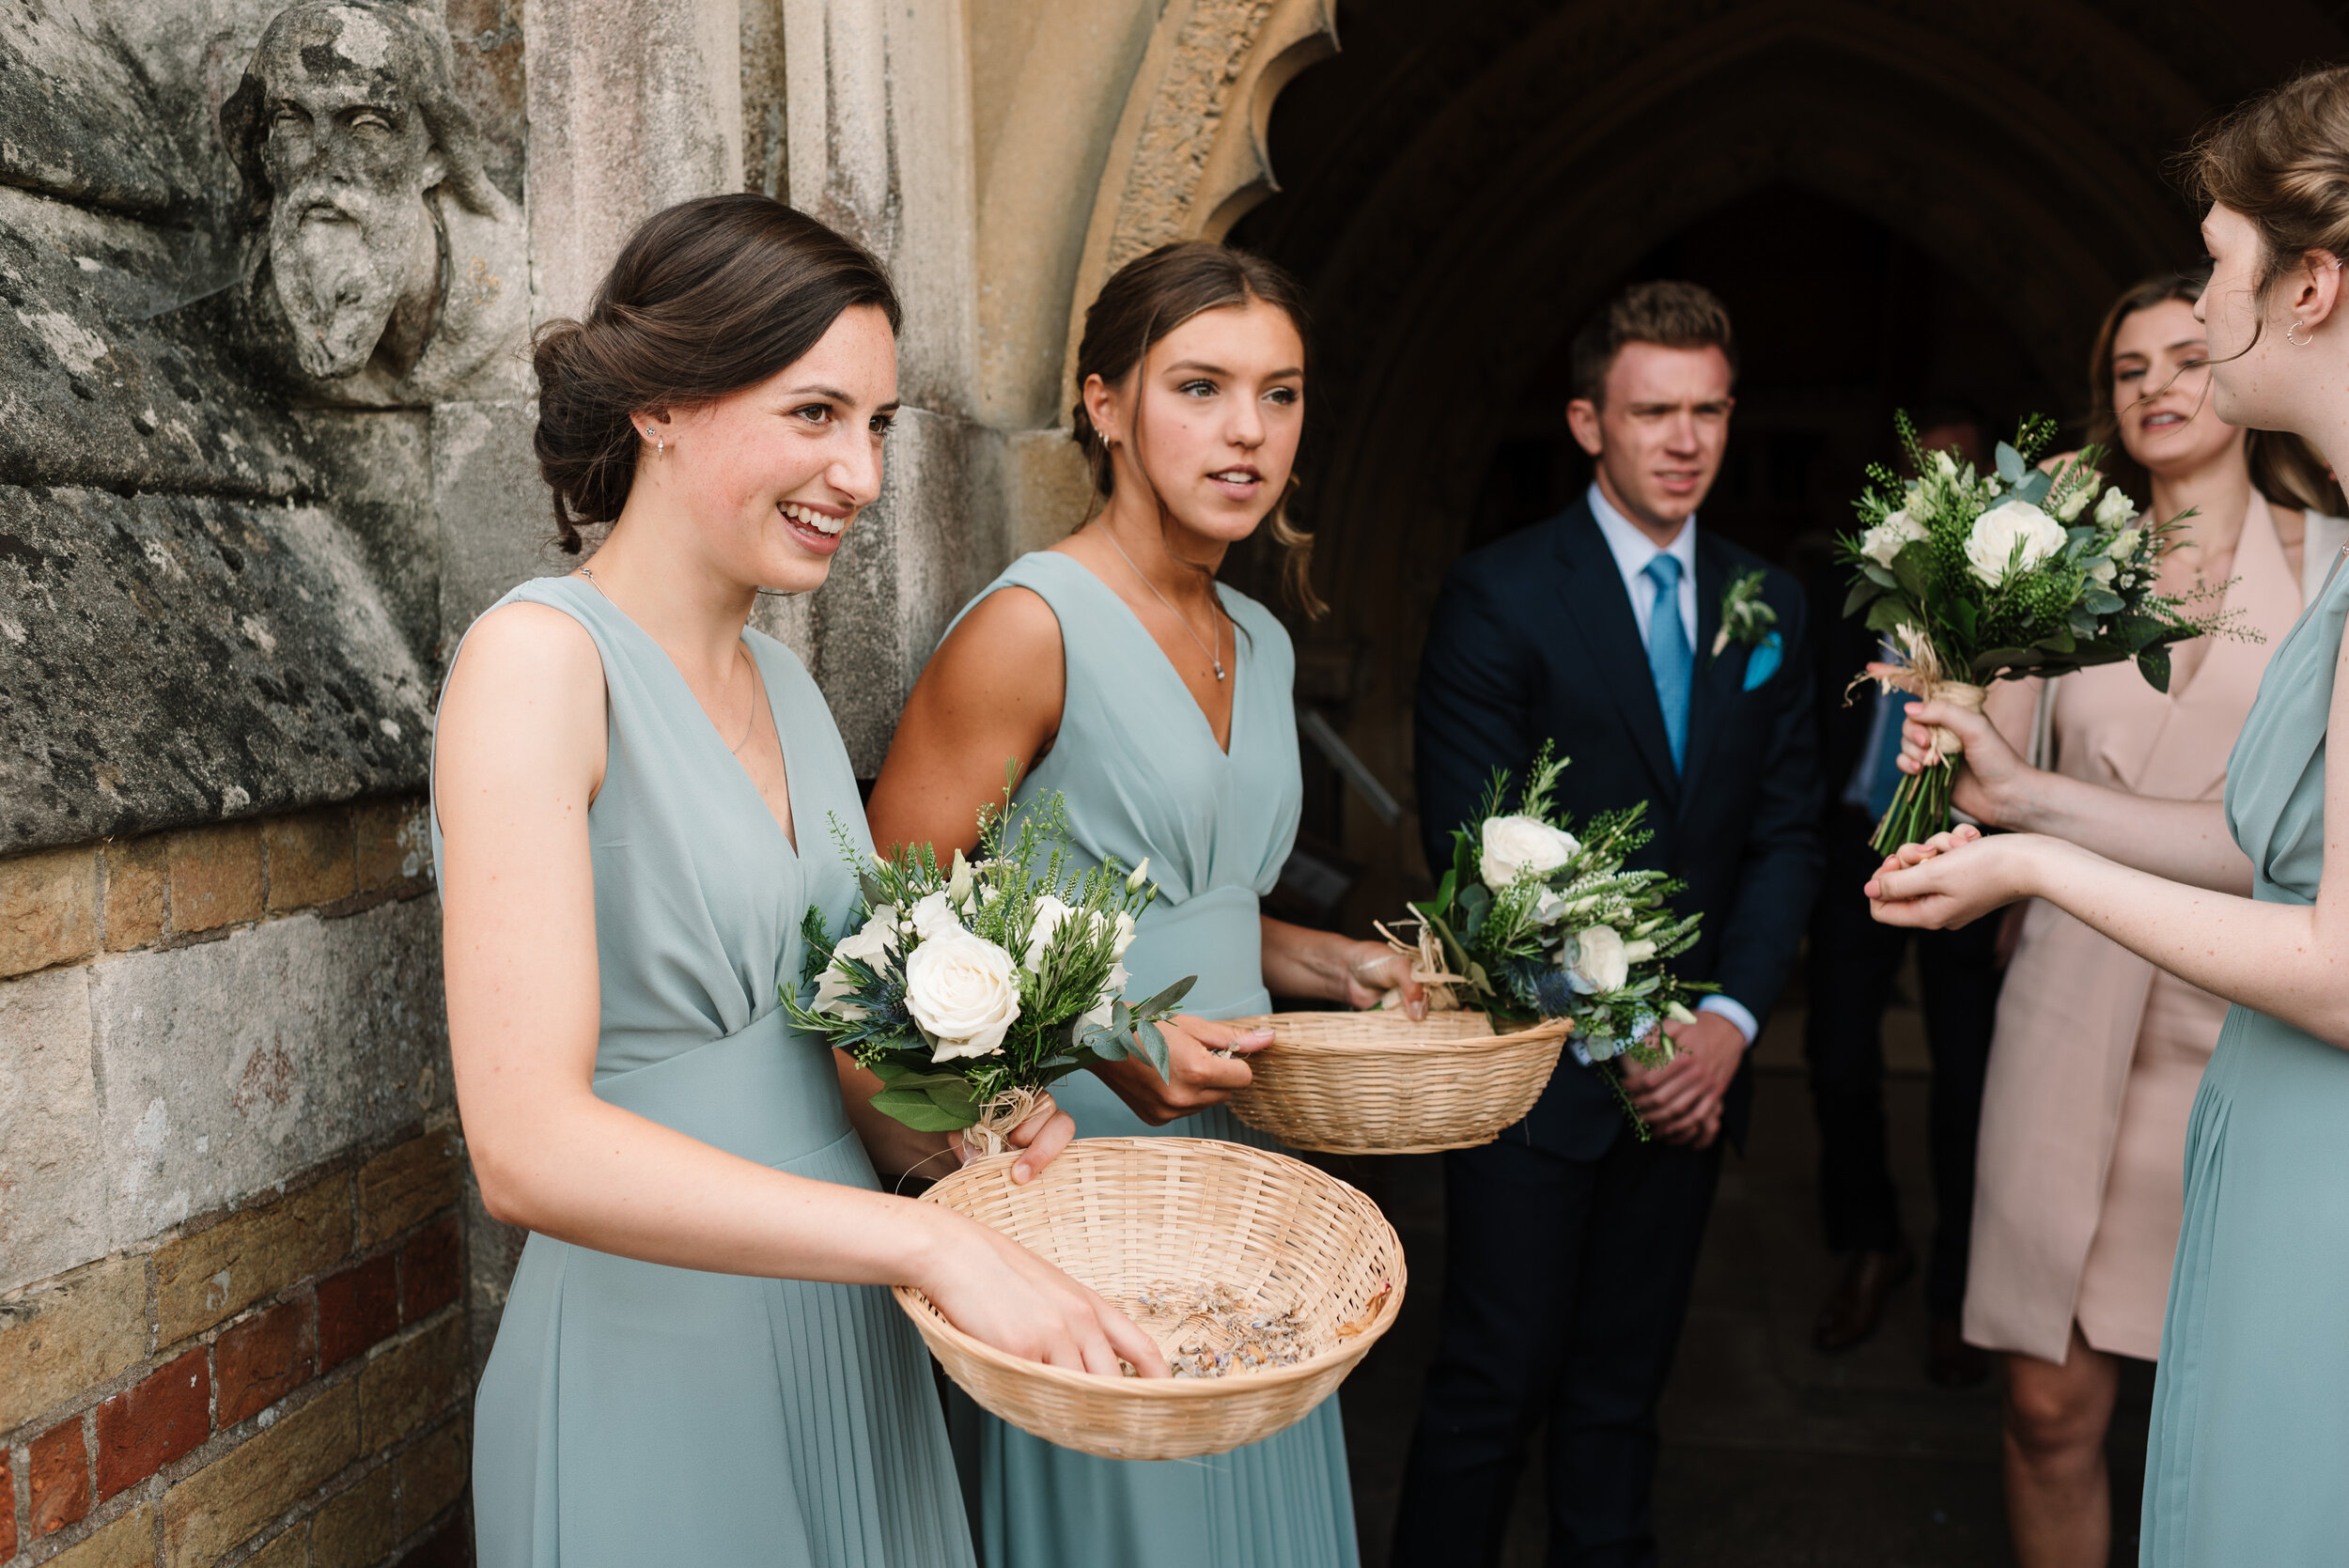 Bridesmaids handing out confetti from baskets to guests outside church